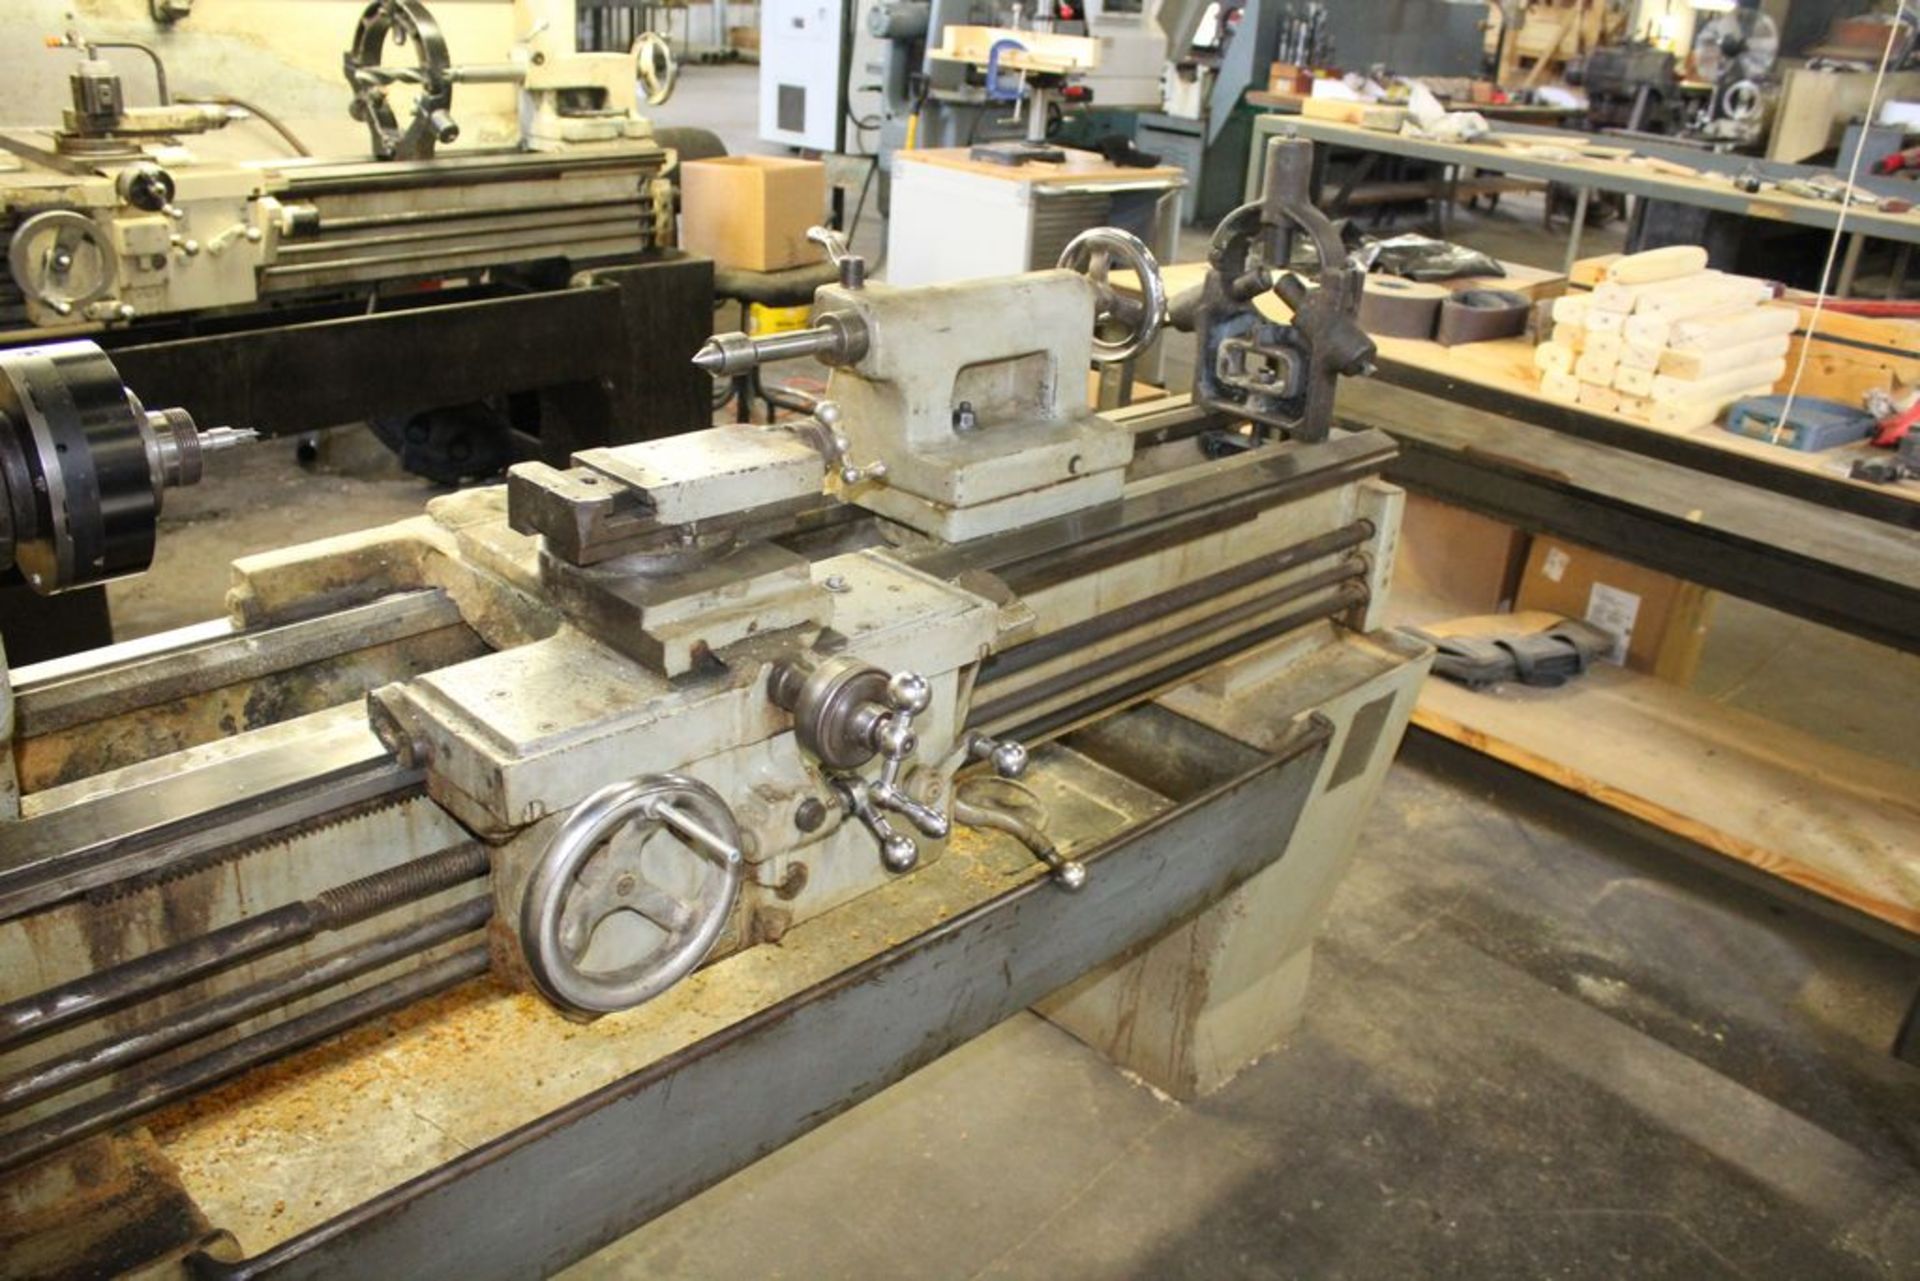 LEBOND REGAL, 15" X 48" TOOL ROOM LATHE, SPINDLE SPEED, 1,200 RPM, WITH TAILSTOCK AND STEADY REST - Image 3 of 3